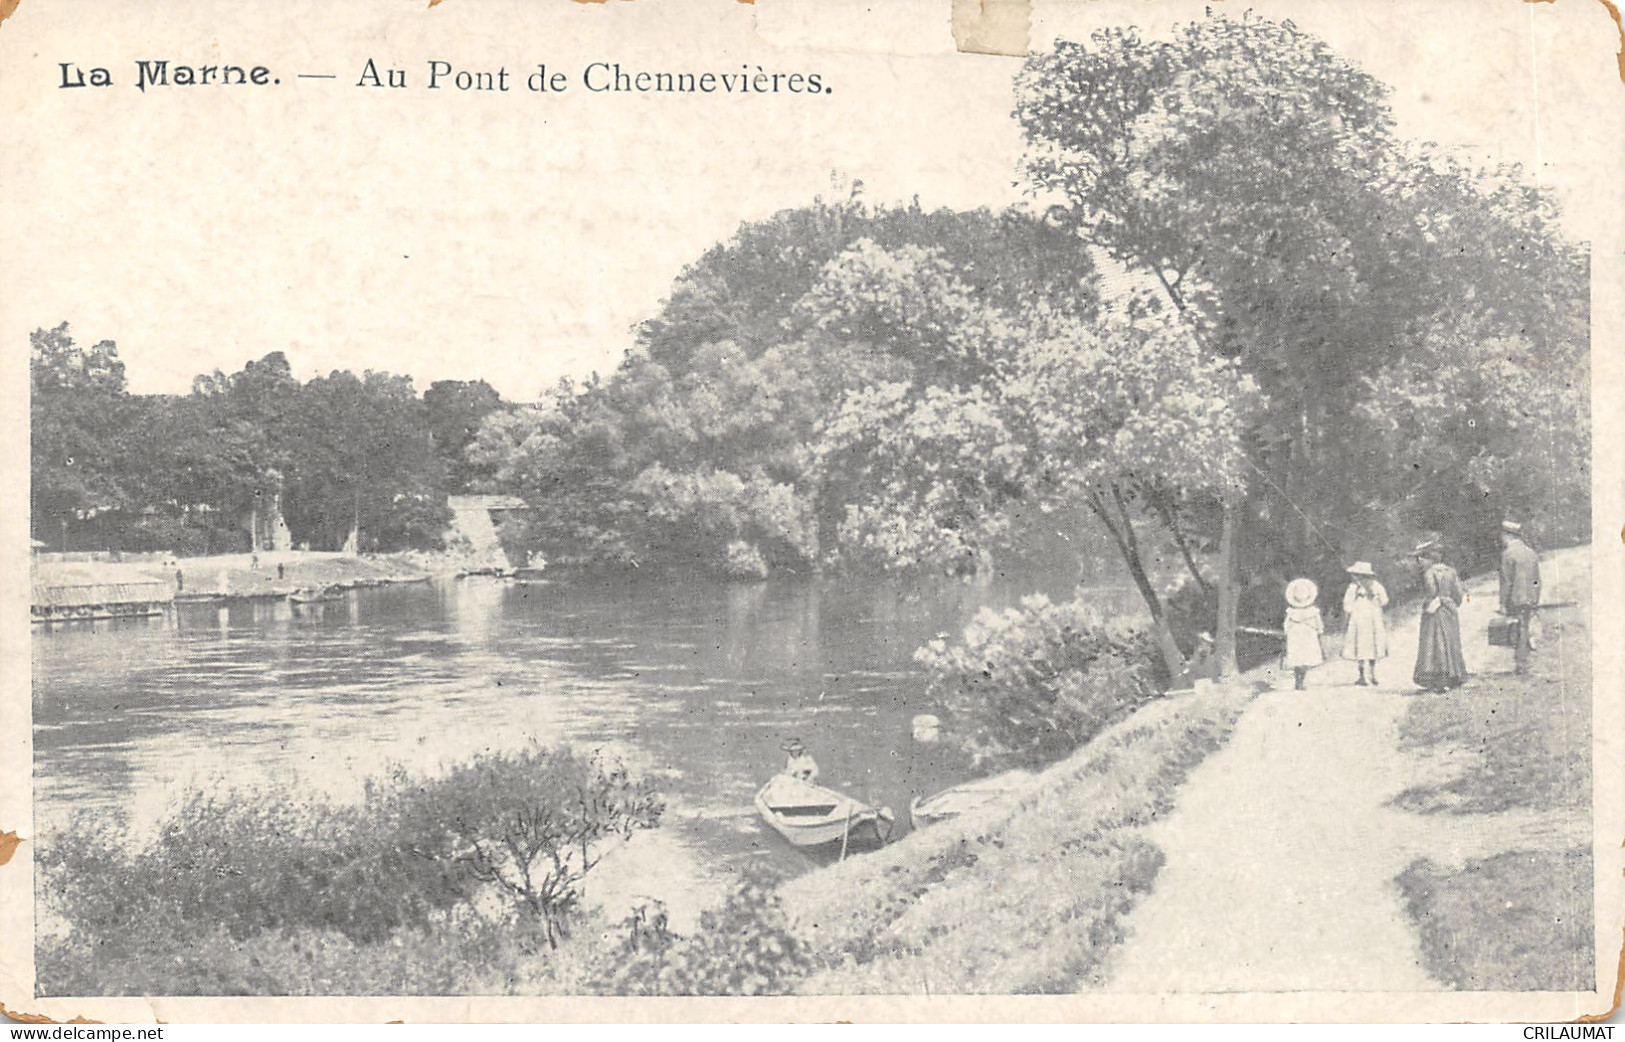 94-CHENNEVIERES SUR MARNE-LE PONT-N°6026-C/0219 - Chennevieres Sur Marne